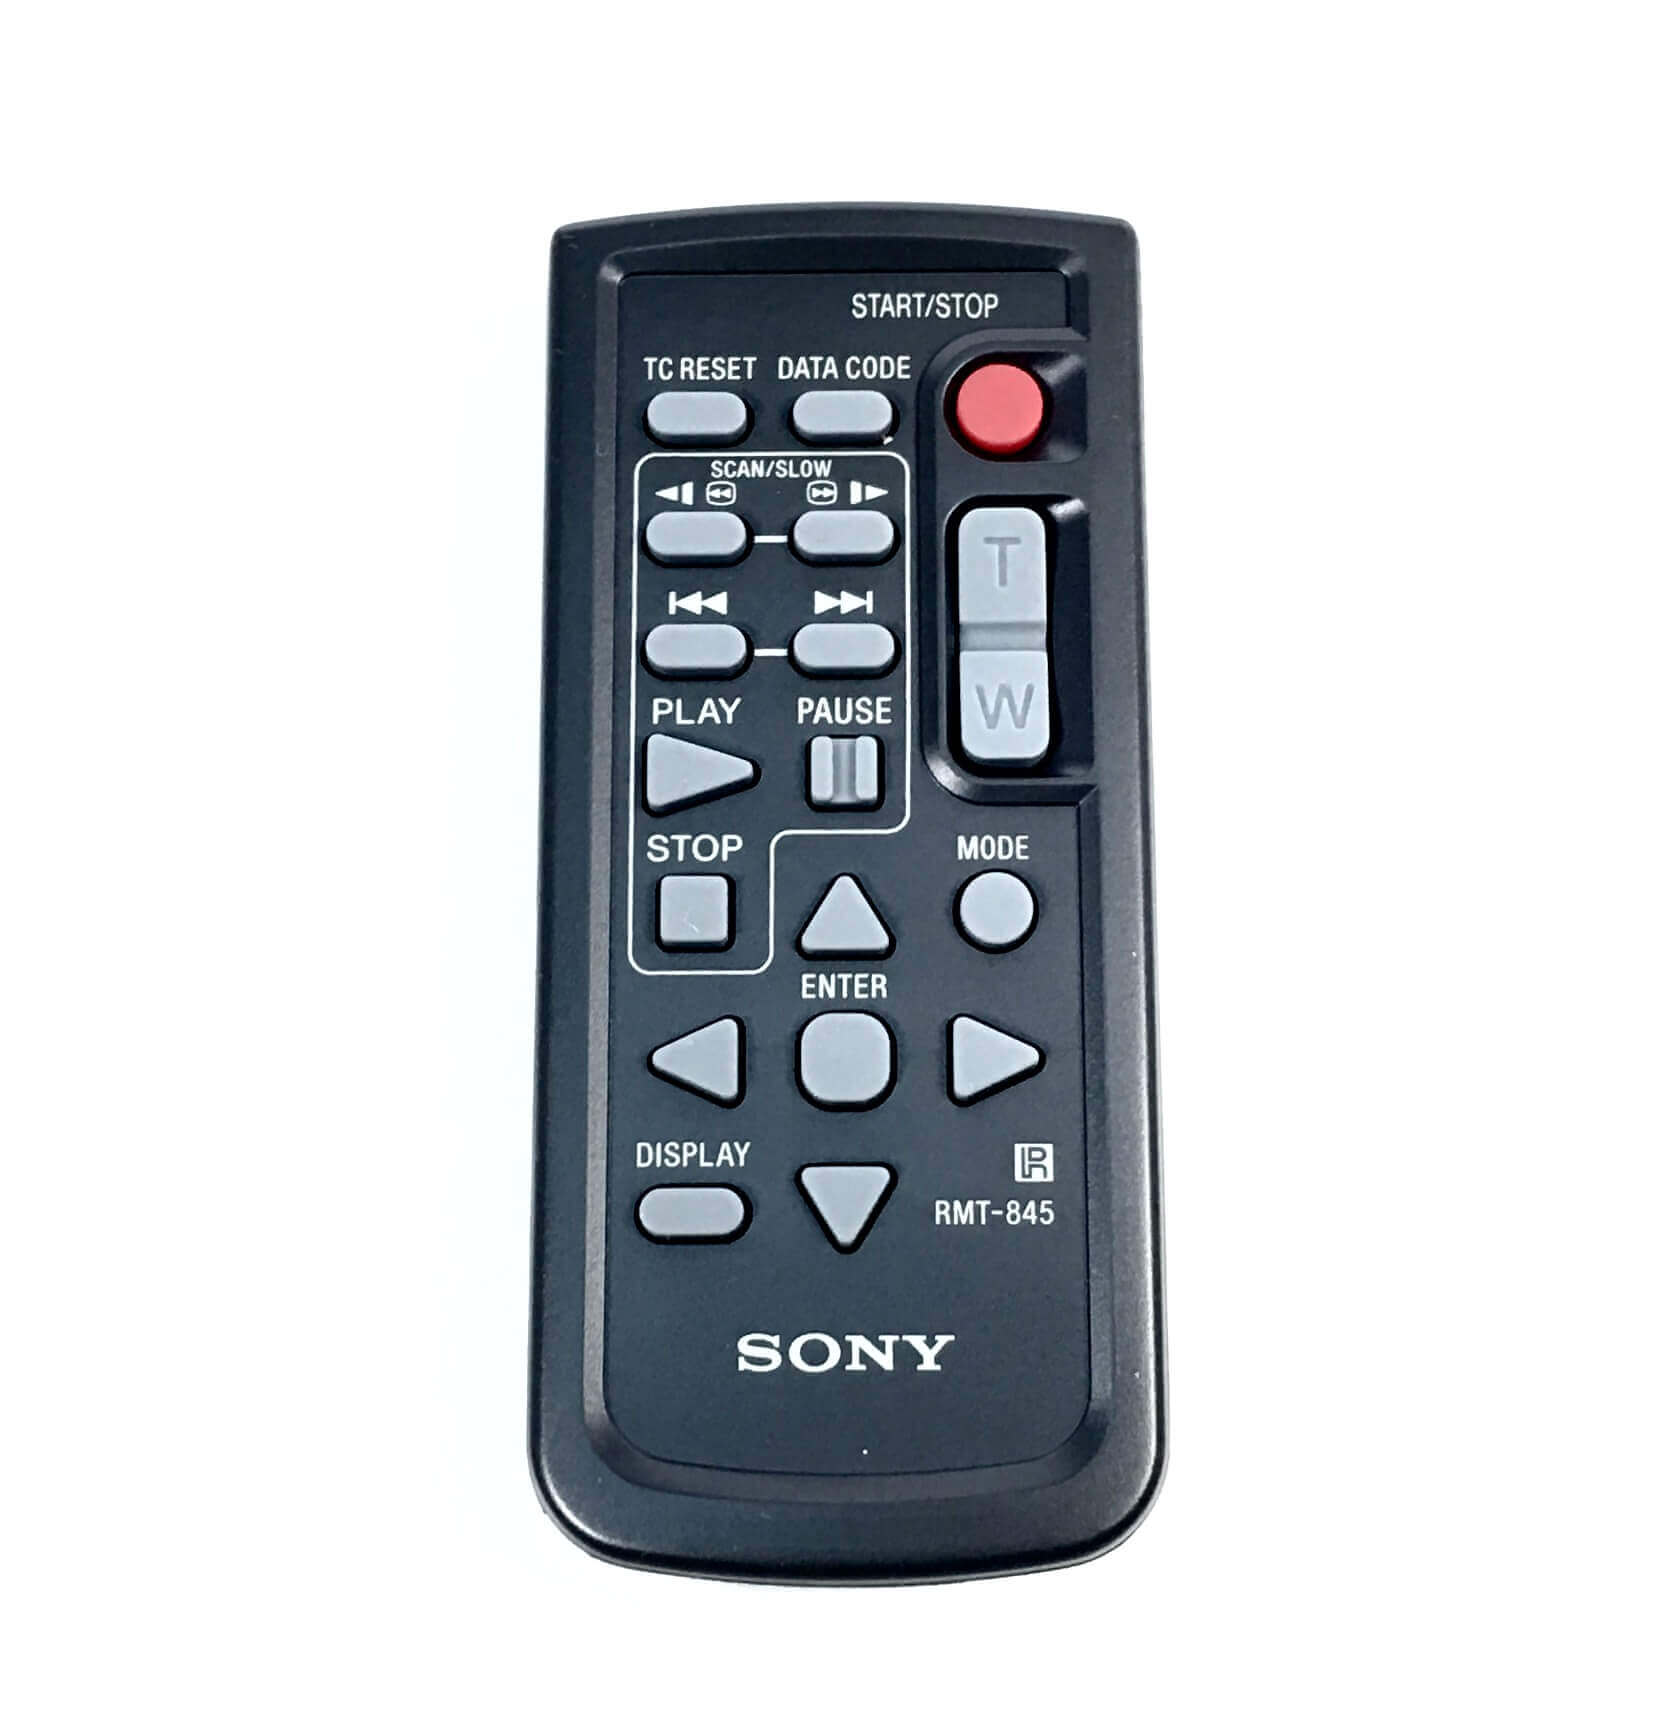 Original wireless remote control that came with the Sony HXR-NX30 camcorder. It is a genuine Sony part, sourced directly from Sony USA. Brand new factory fresh. Free Shipping.